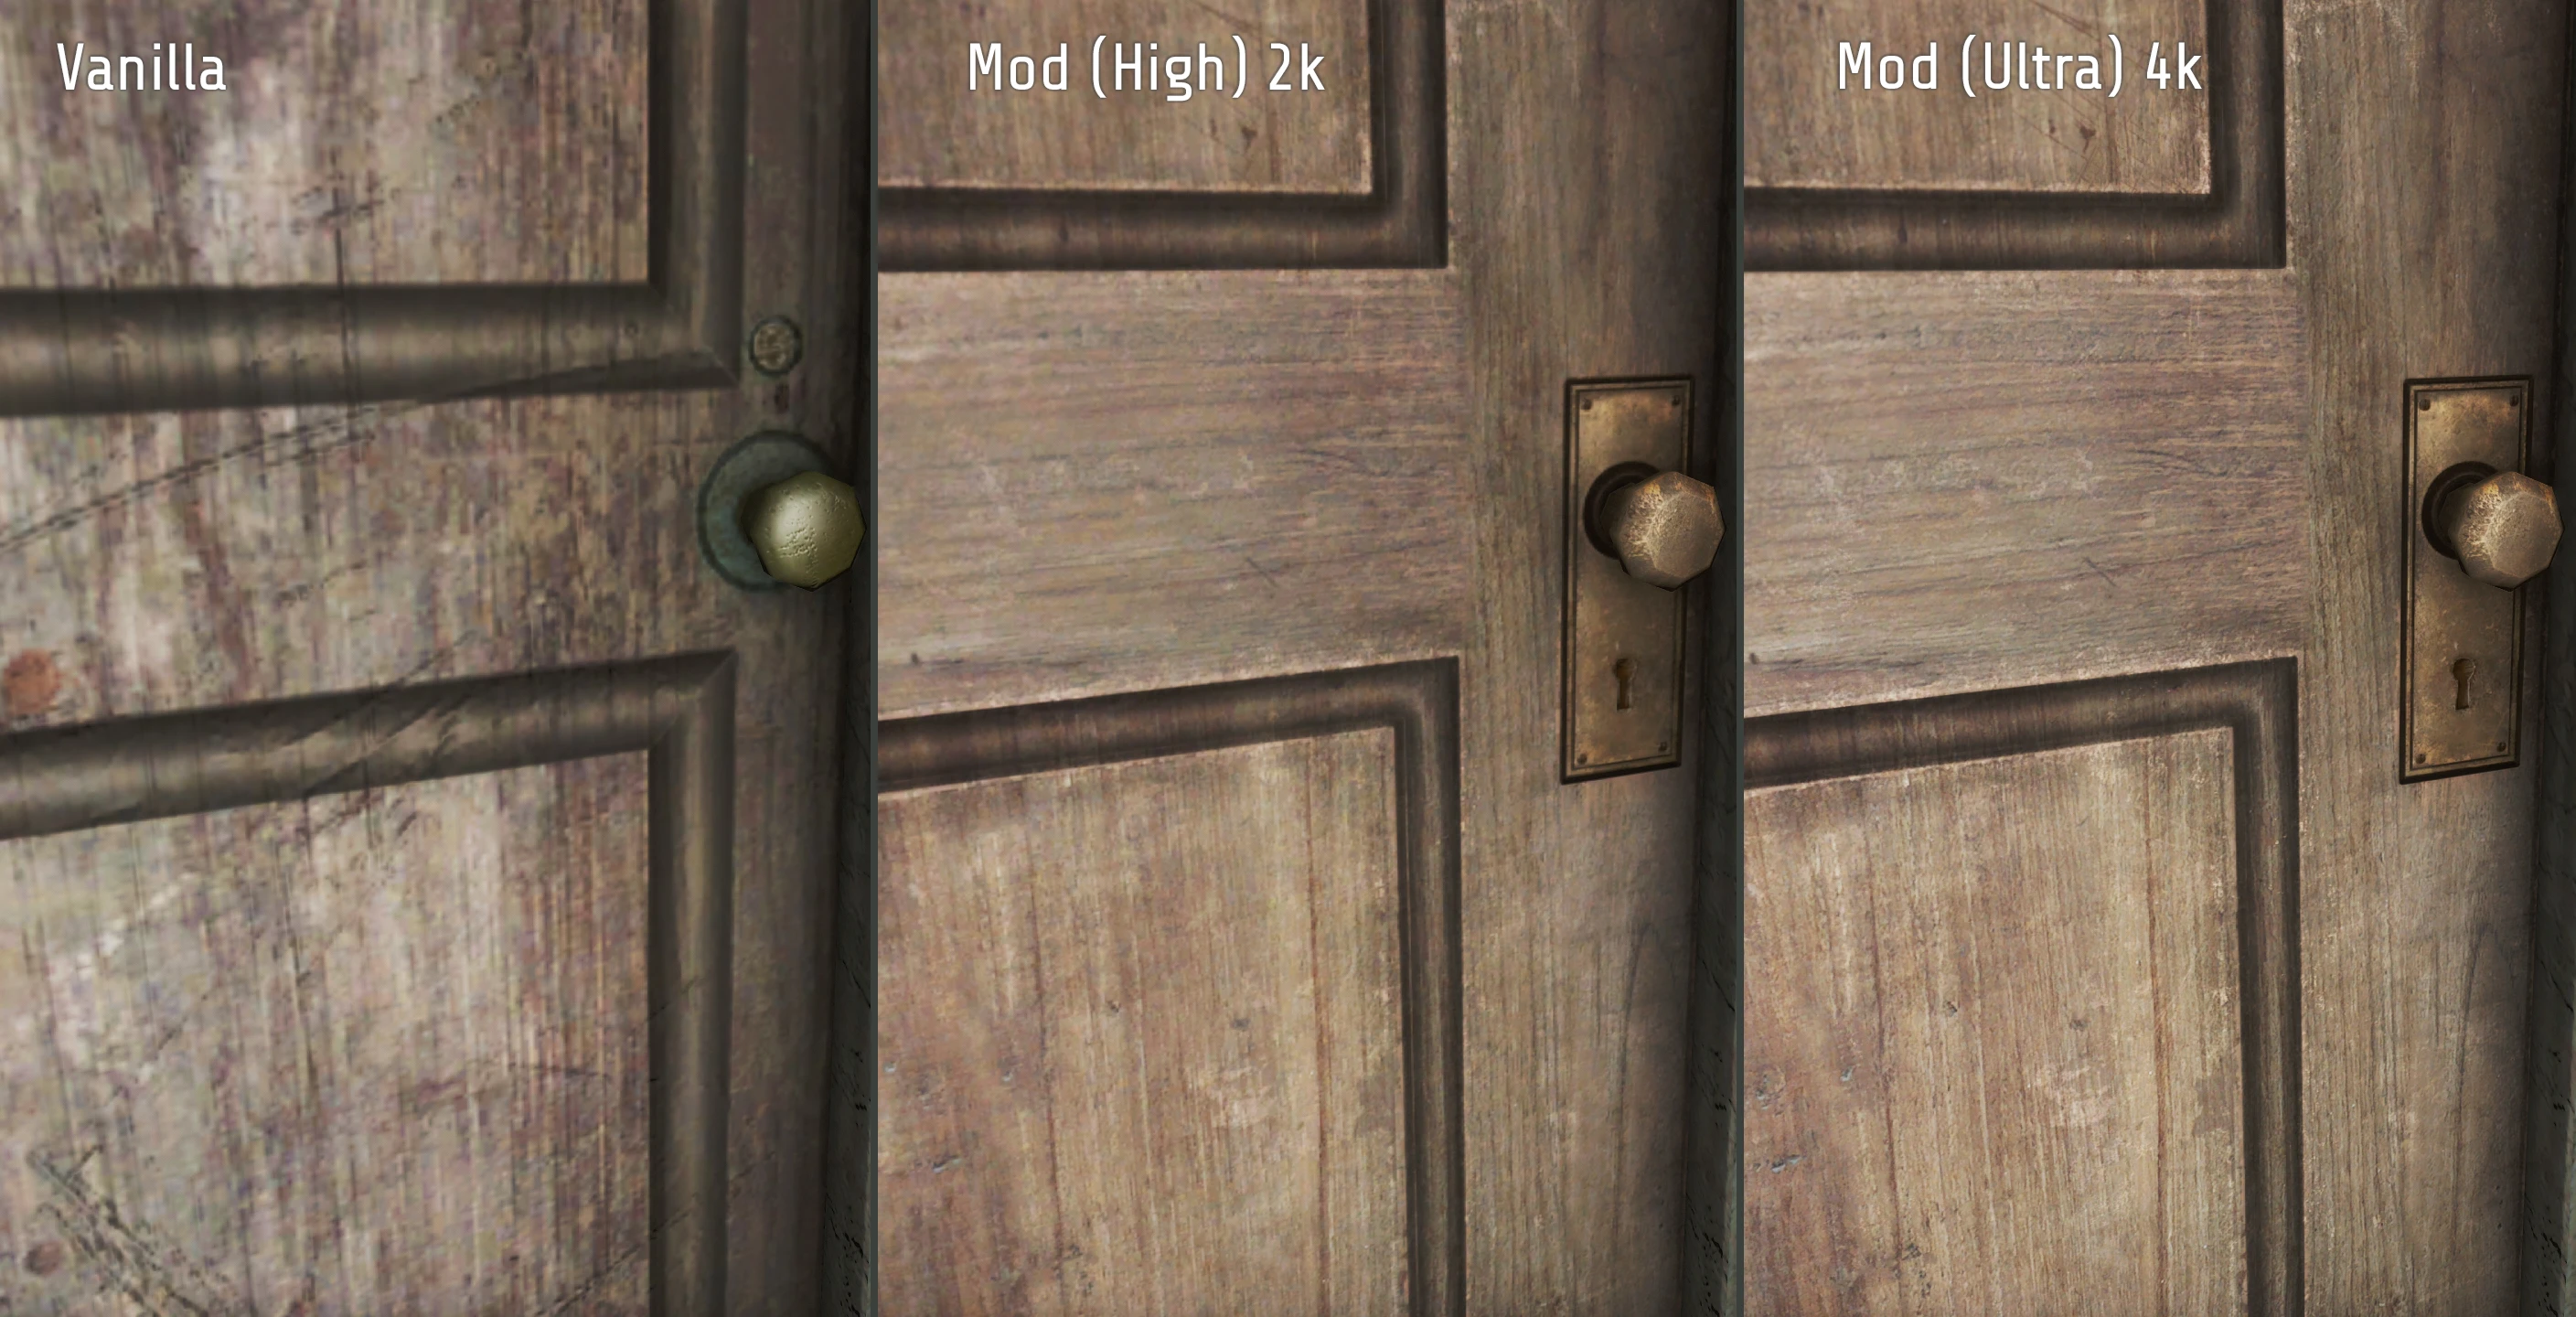 fallout 4 texture mods not working